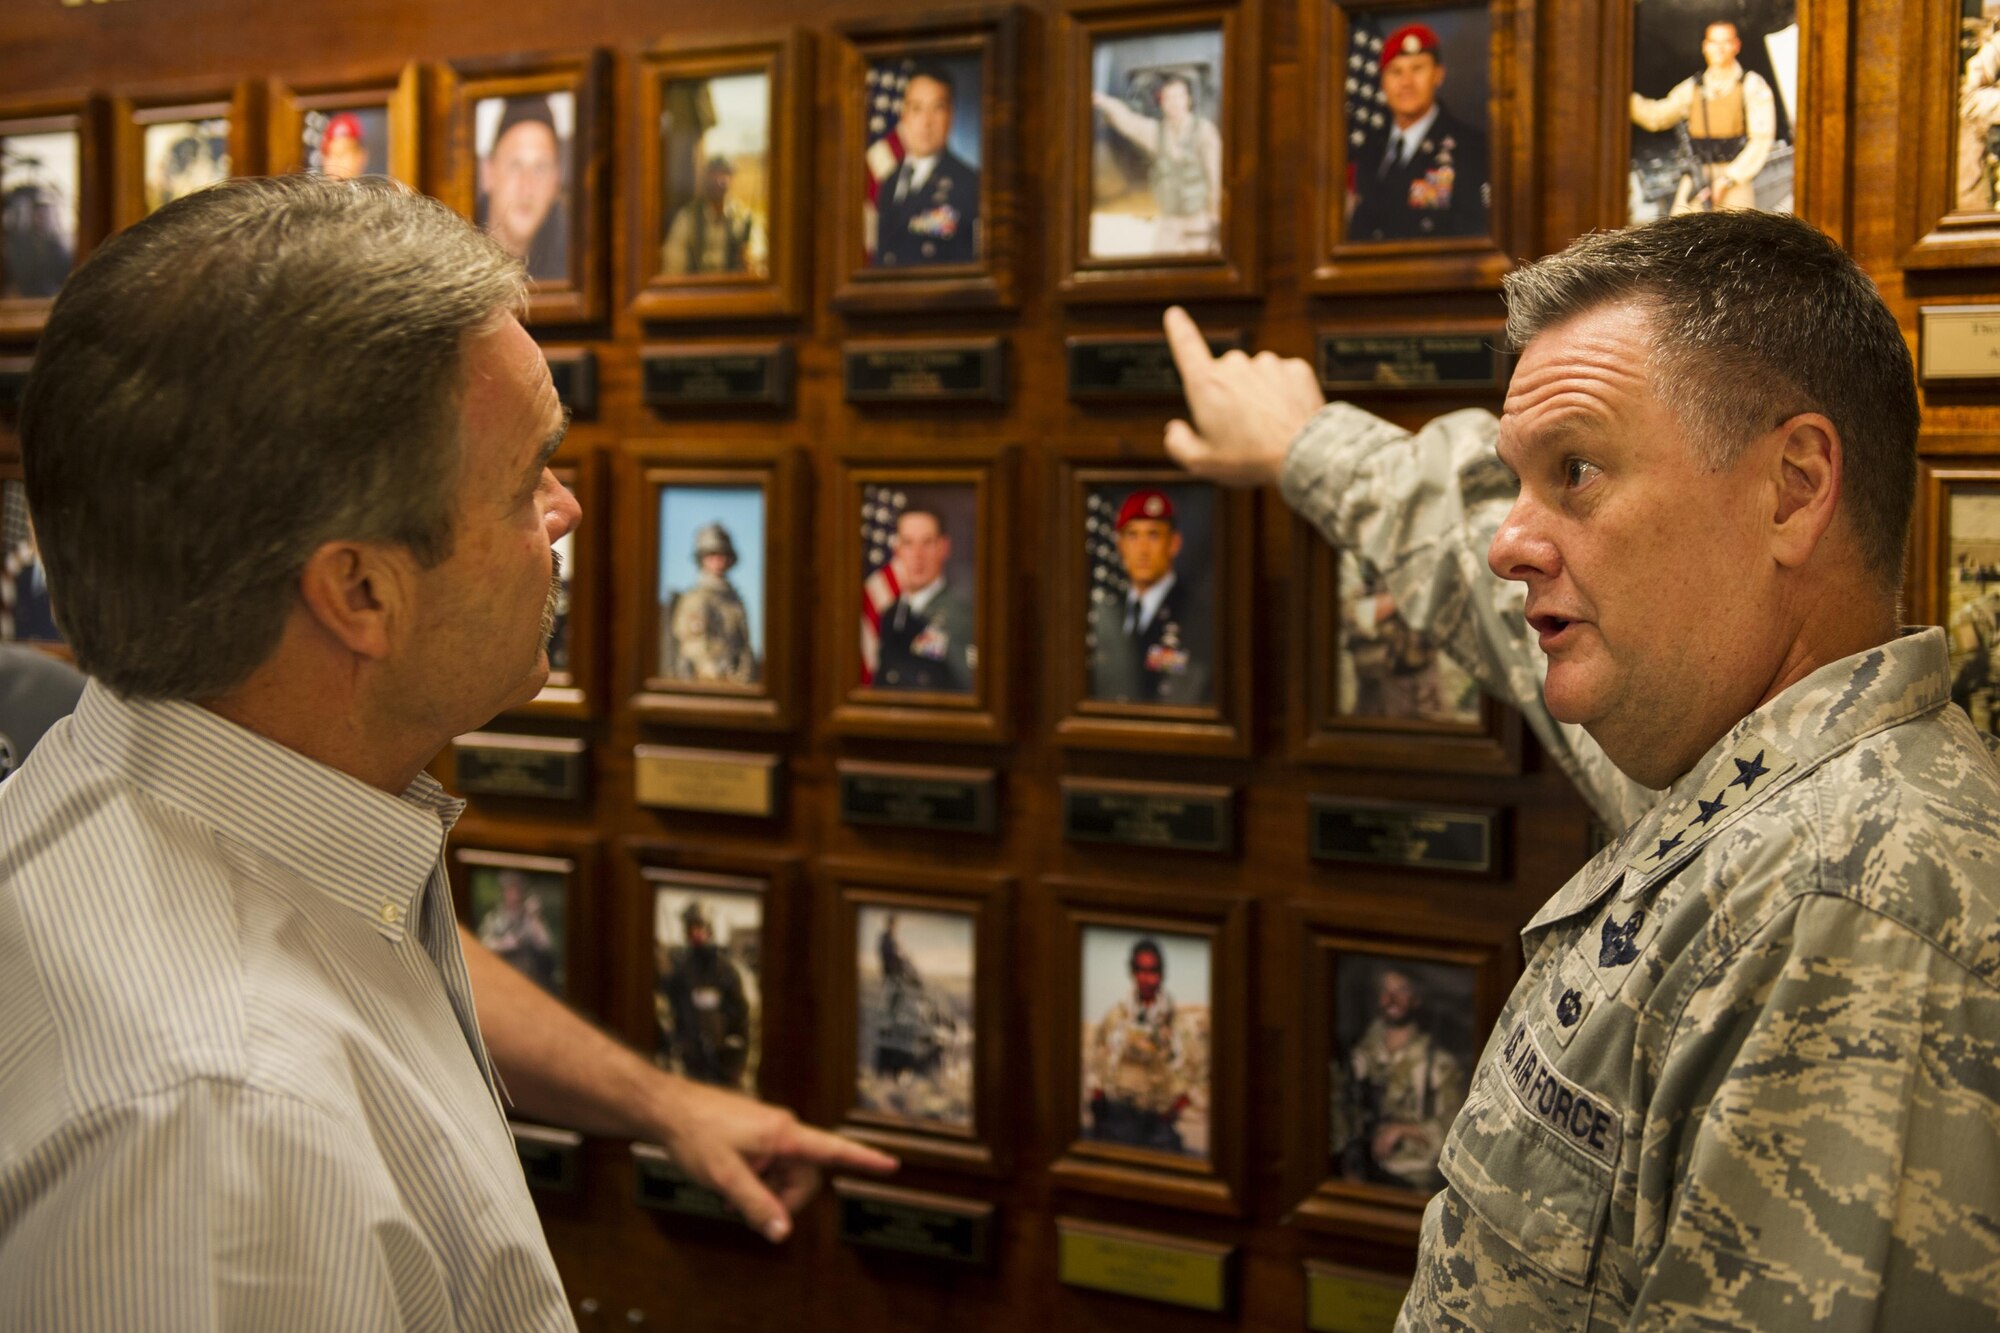 Lt. Gen. Brad Webb, commander of Air Force Special Operations Command, briefs Stacey Martin, an Air Force Chief of Staff civic leader from Clovis, N.M., on the history of the Air Force Cross and Silver Star Medal recipients at Hurlburt Field, Fla., Nov. 2, 2016. Civic leaders are unpaid advisors, key communicators and advocates for the Air Force. (U.S. Air Force photo by Airman 1st Class Joseph Pick)